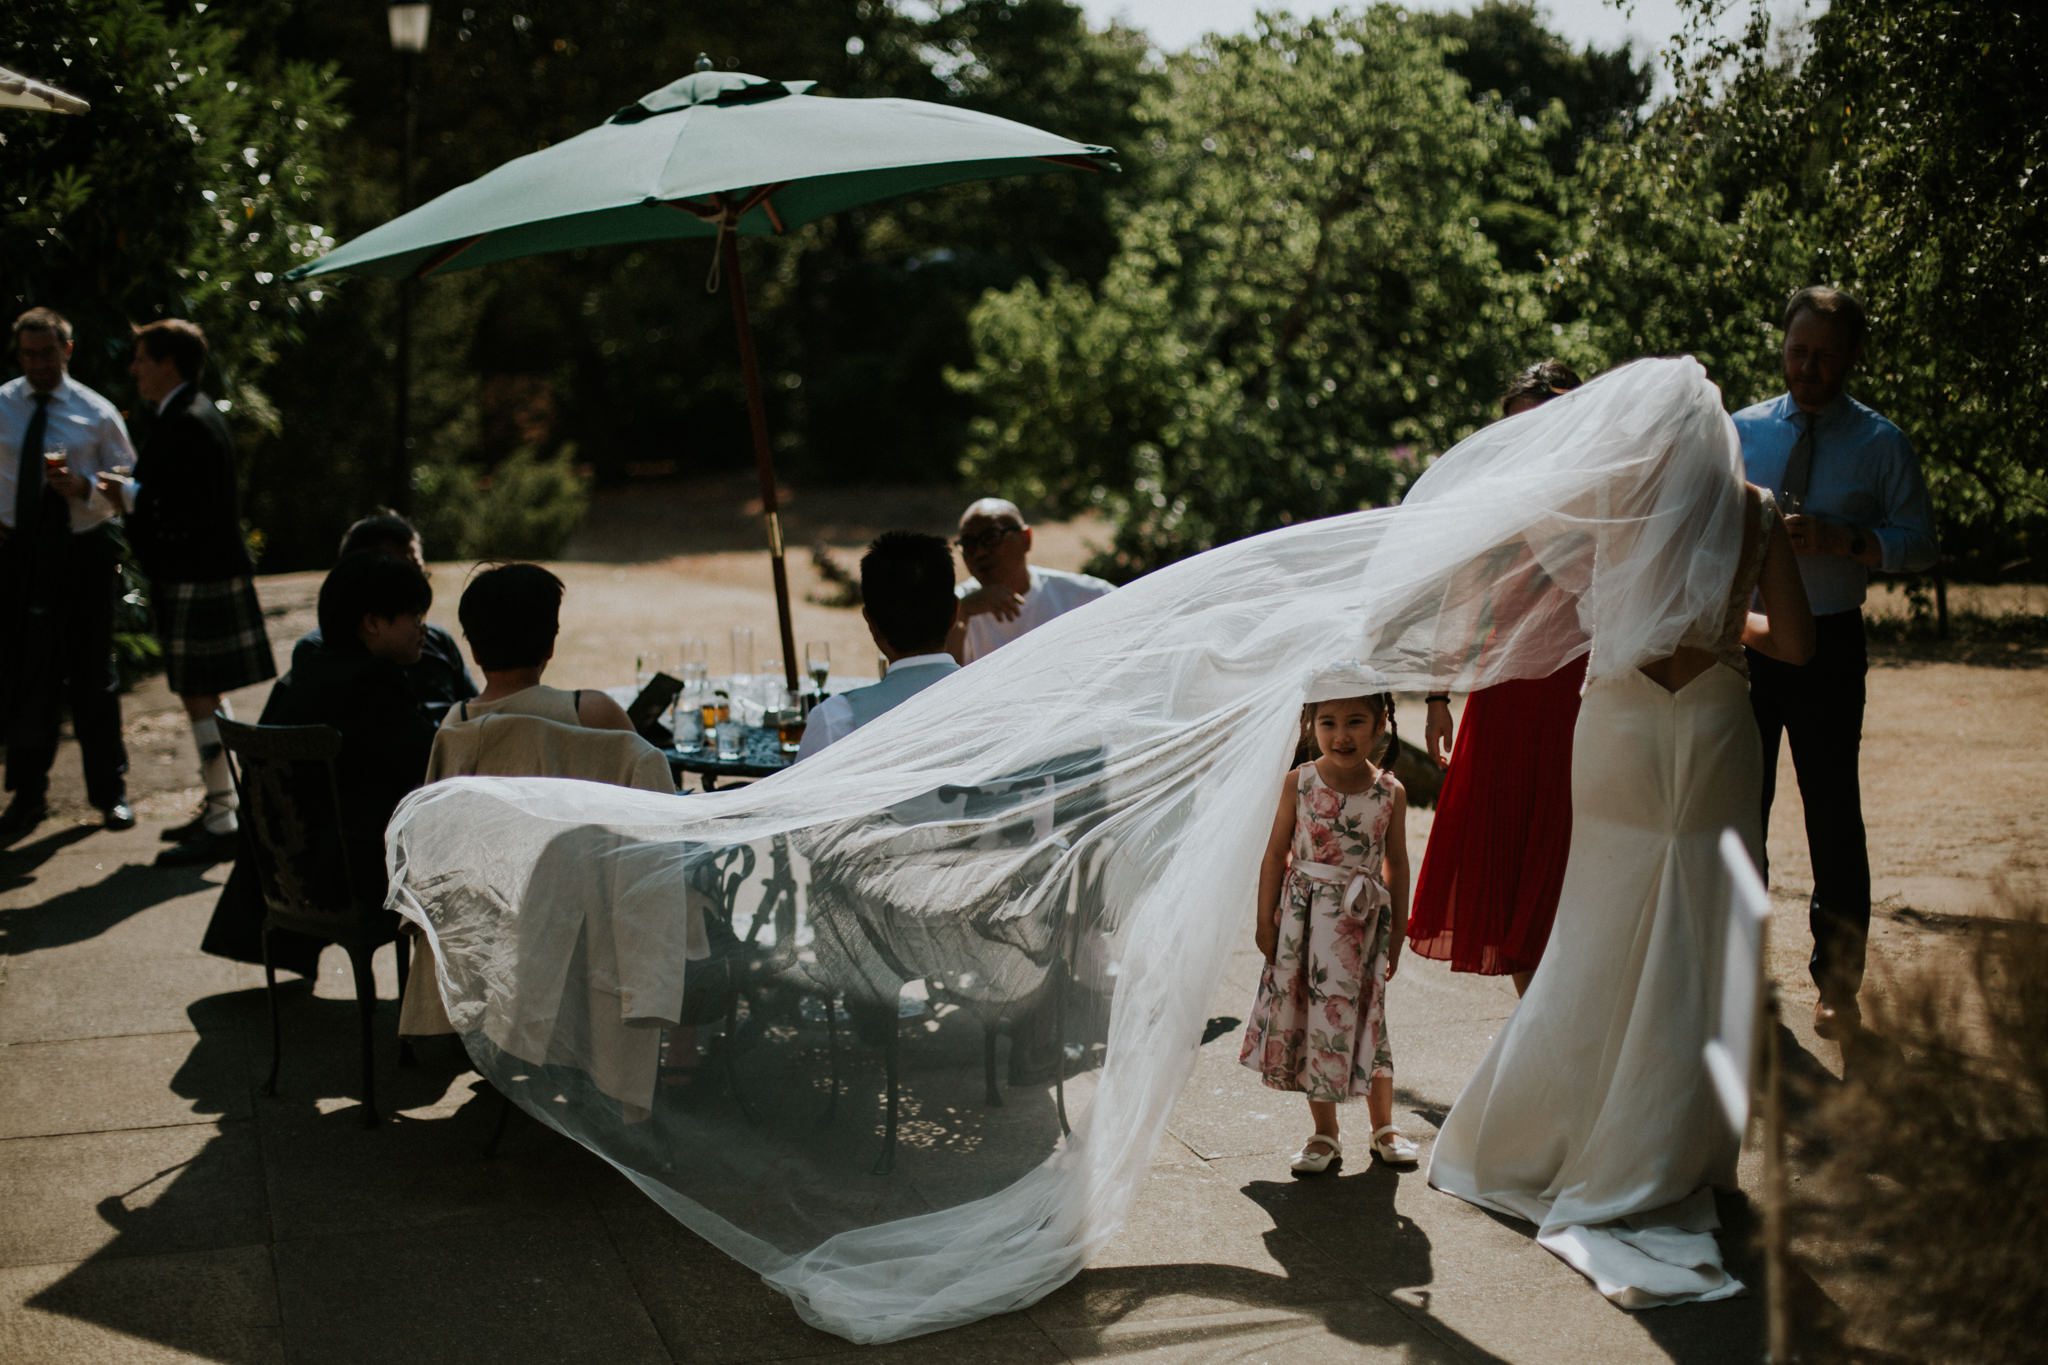 A small girl peeps out from underneath the bride's veil as it is caught by the wind